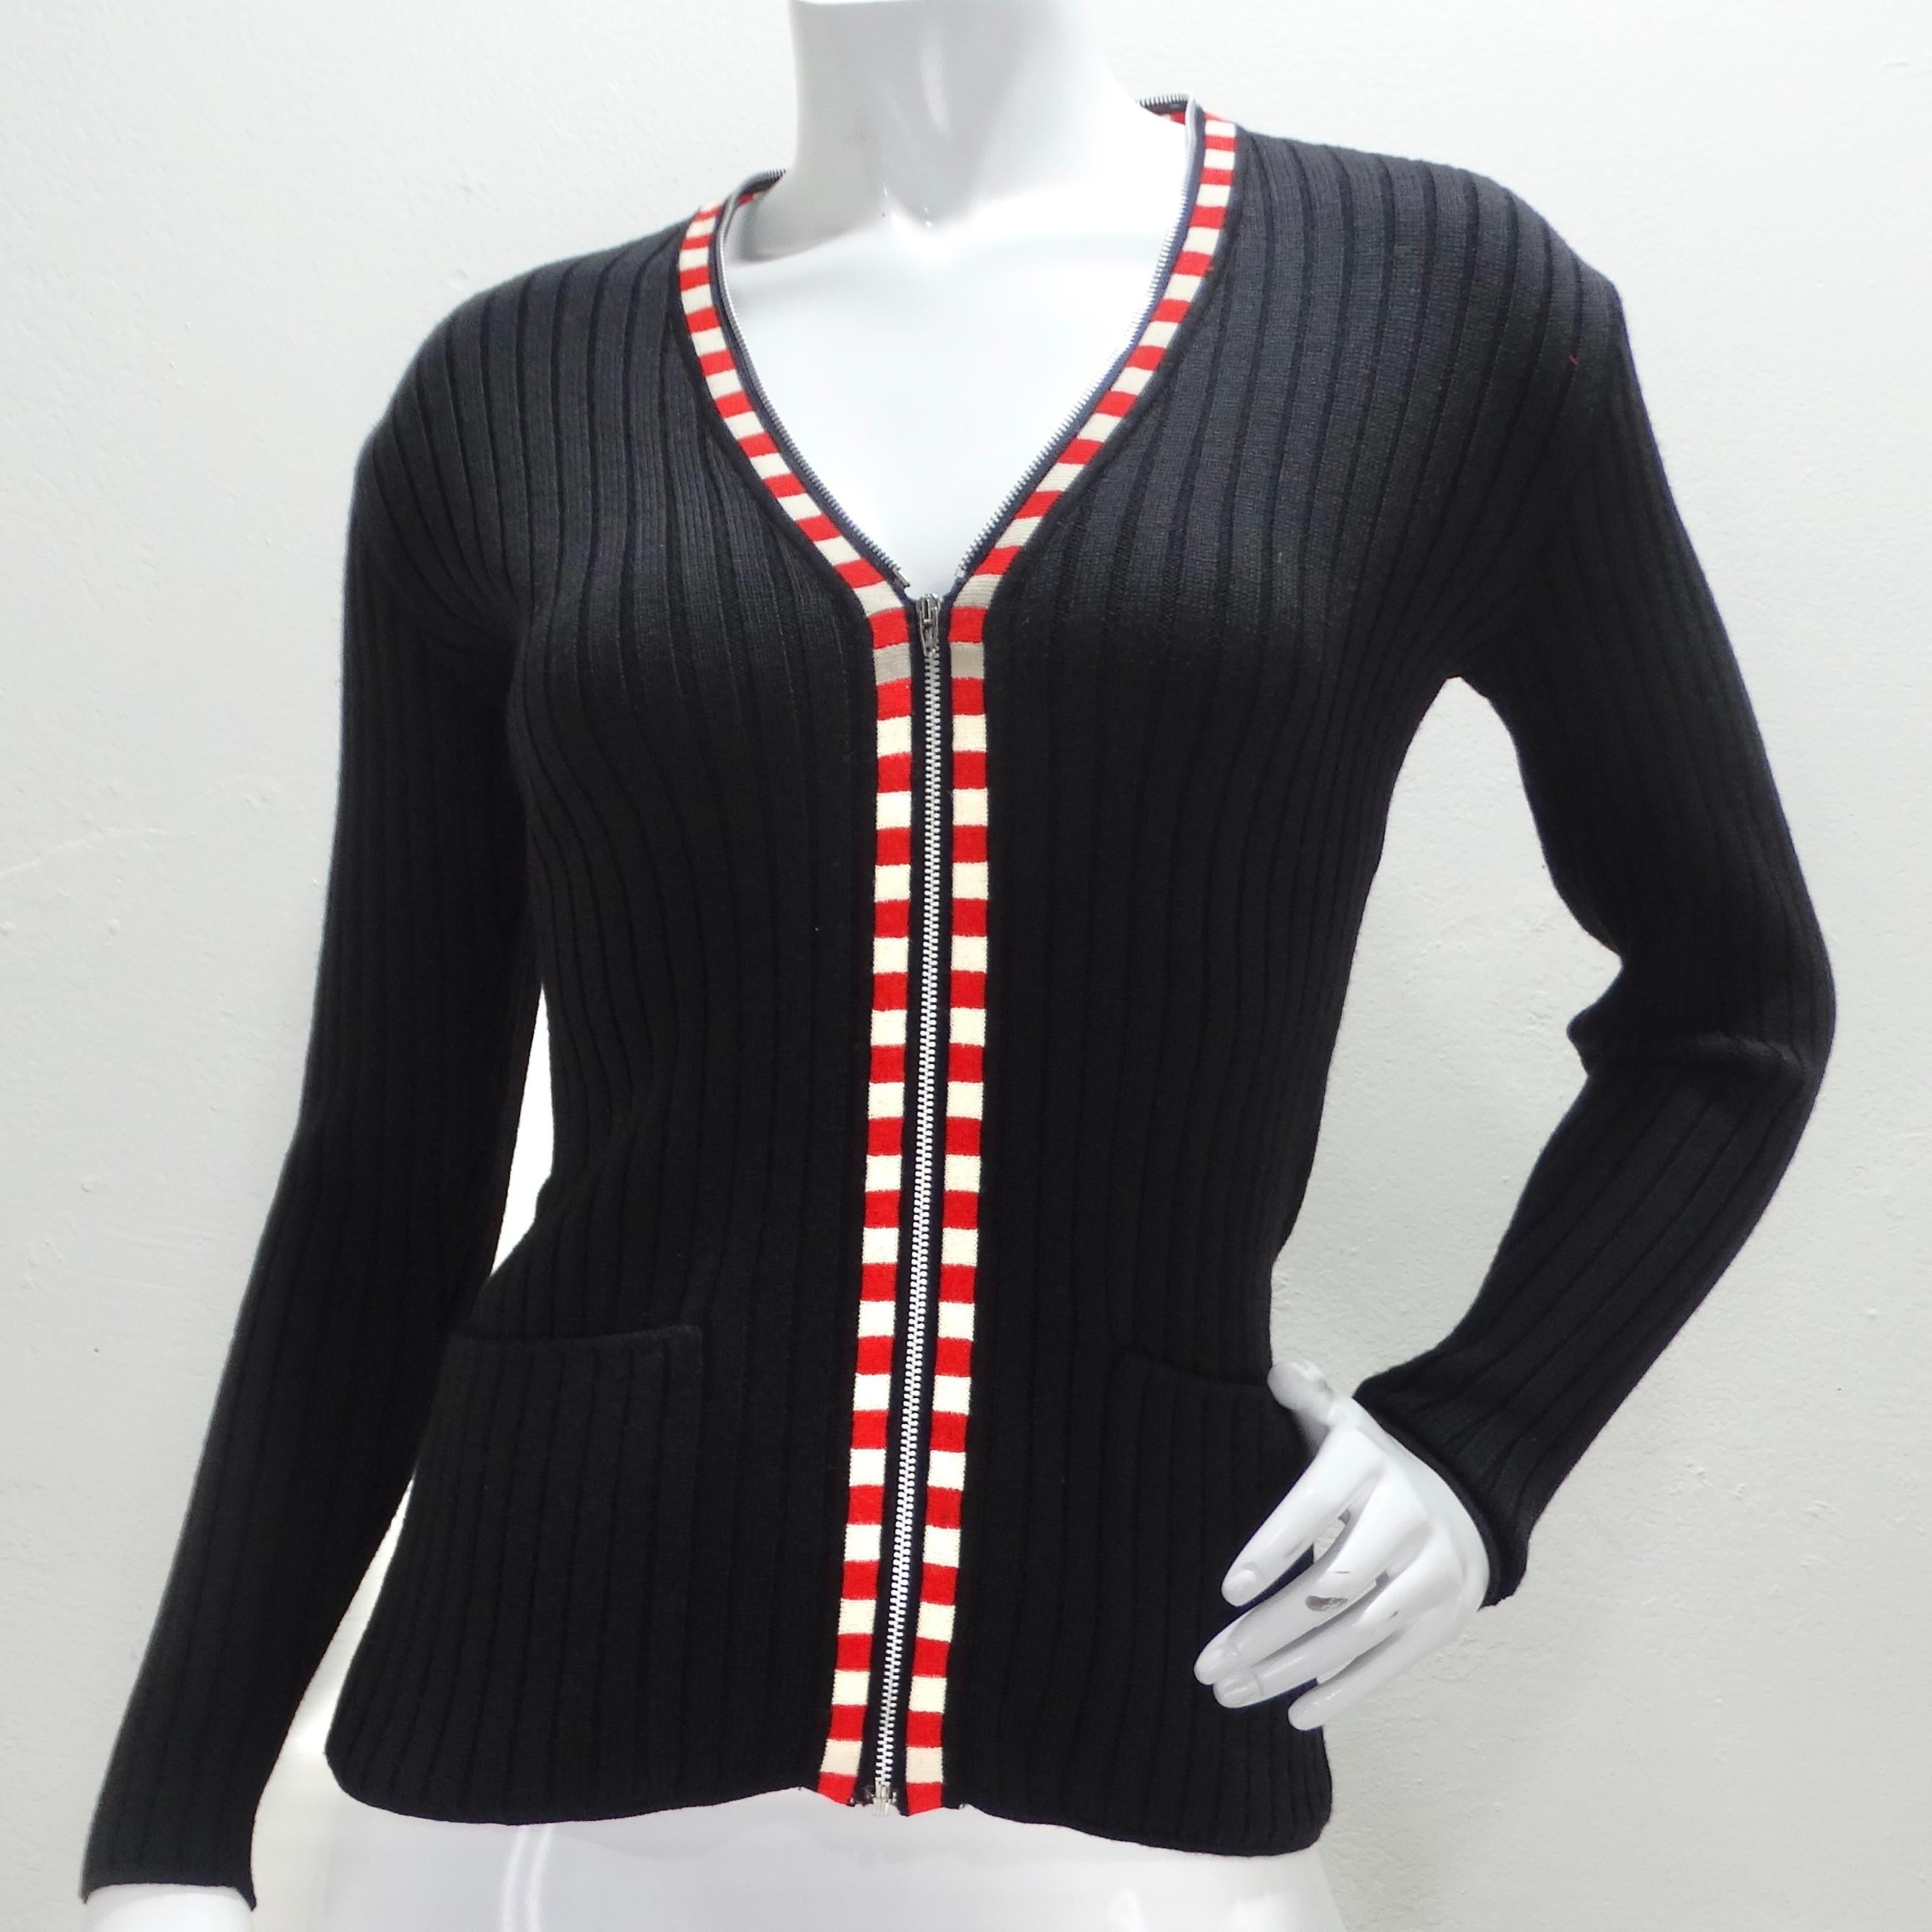 Step back in time with this iconic 1990s Jean Paul Gaultier rib-knit zip-up sweater. Crafted from a luxurious and thick black rib-knit fabric, this sweater exudes style and sophistication. Its standout feature is the striking red and white trim that